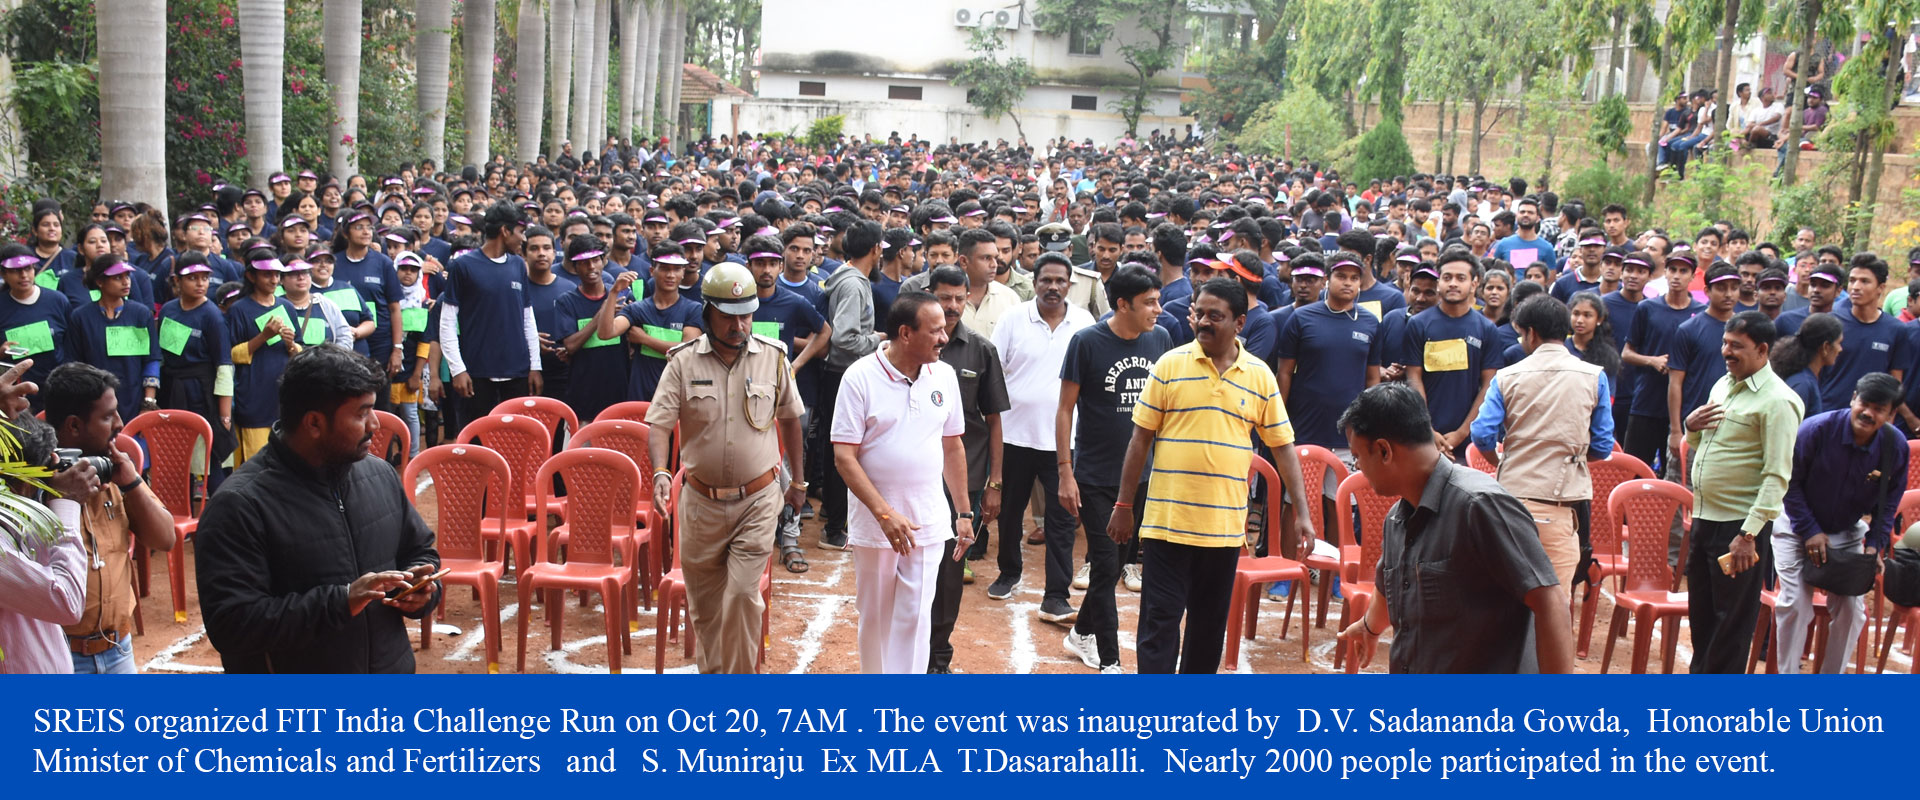 FIT India challenge inaugurated by D.V Sadananda Gowda